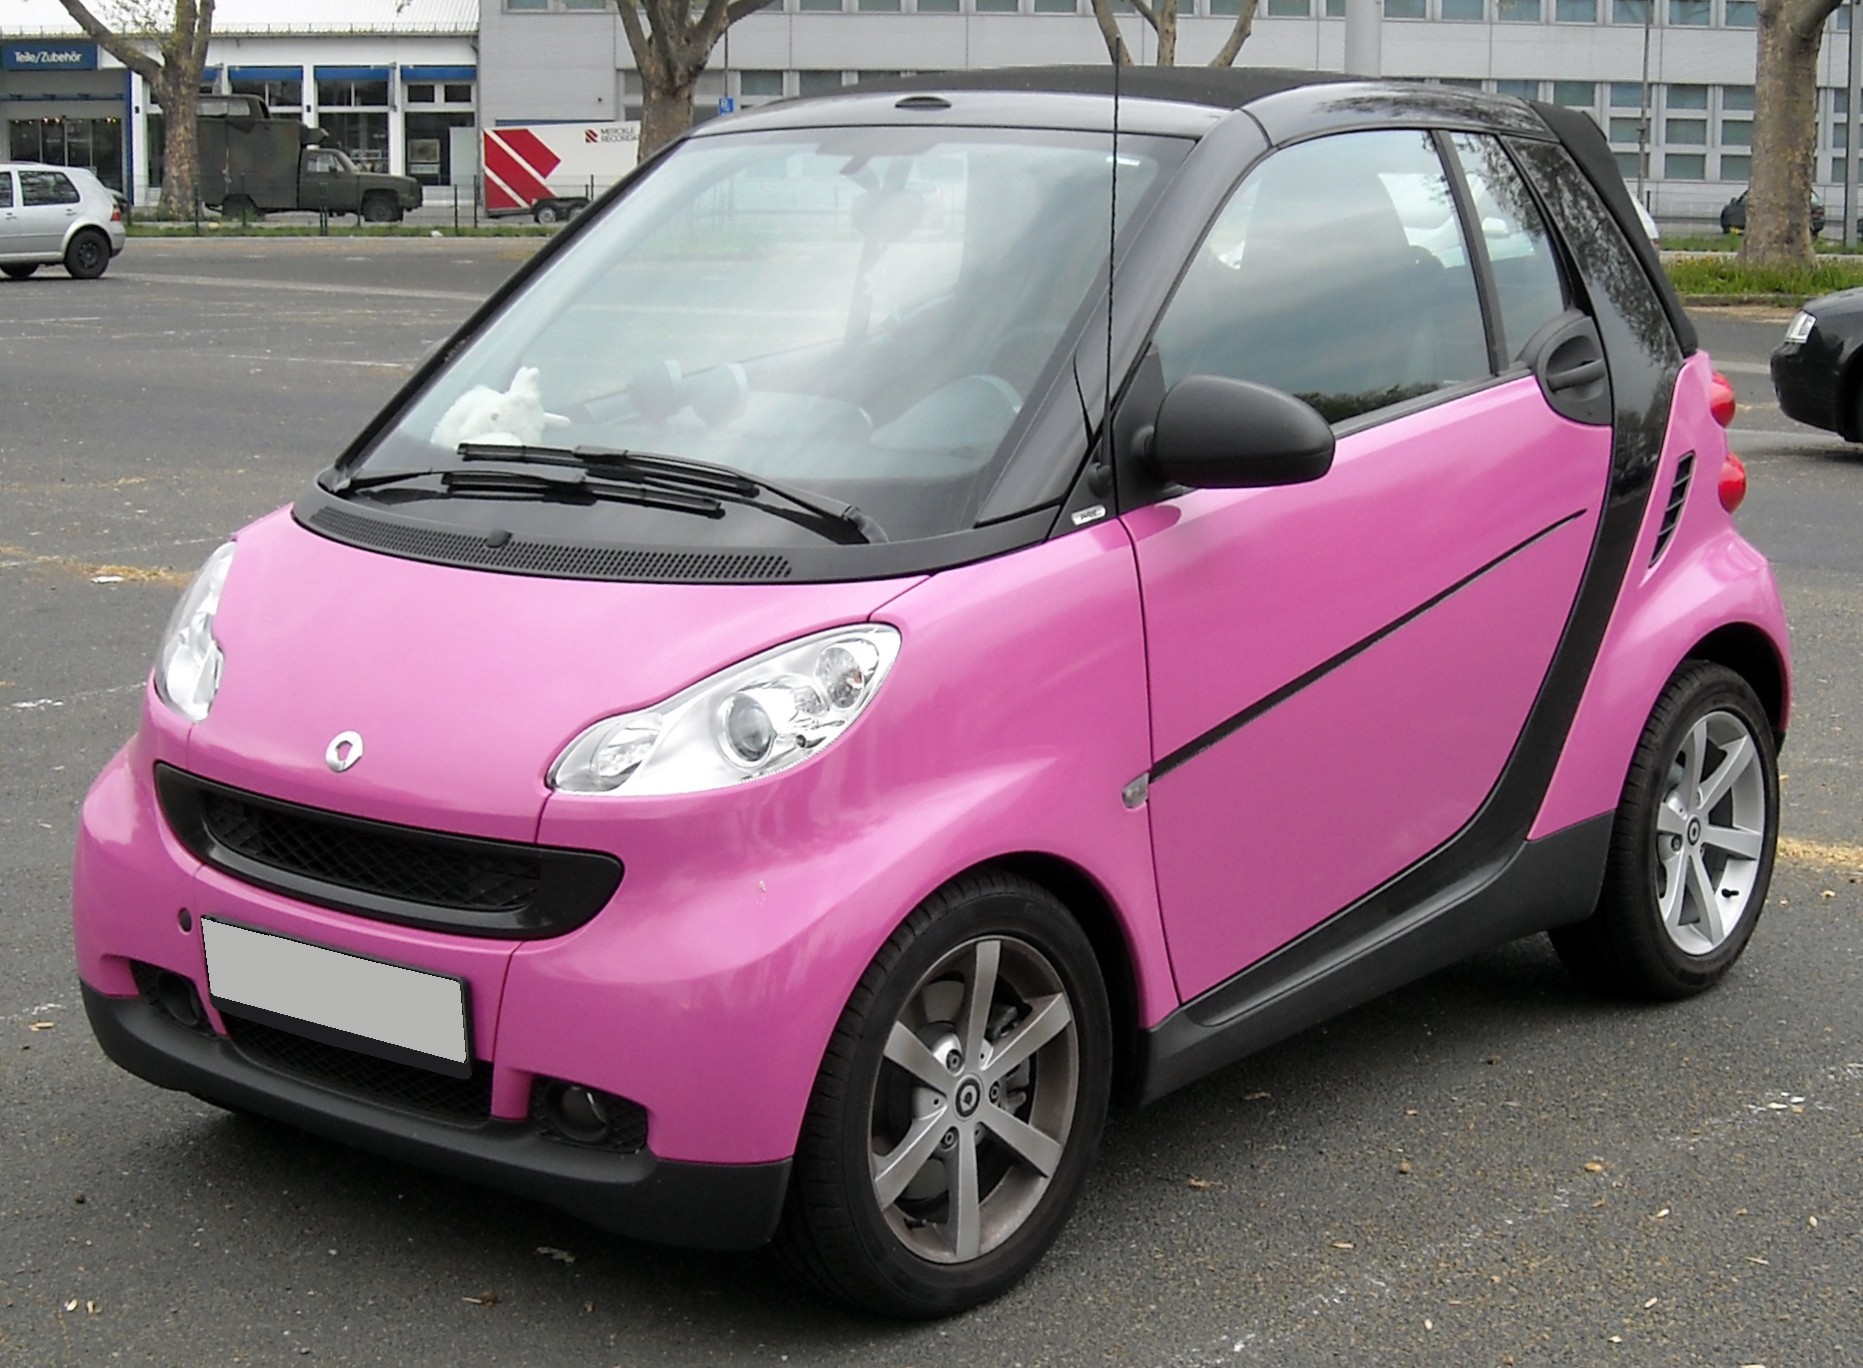 File:Smart Fortwo front 20090418.jpg - Wikipedia